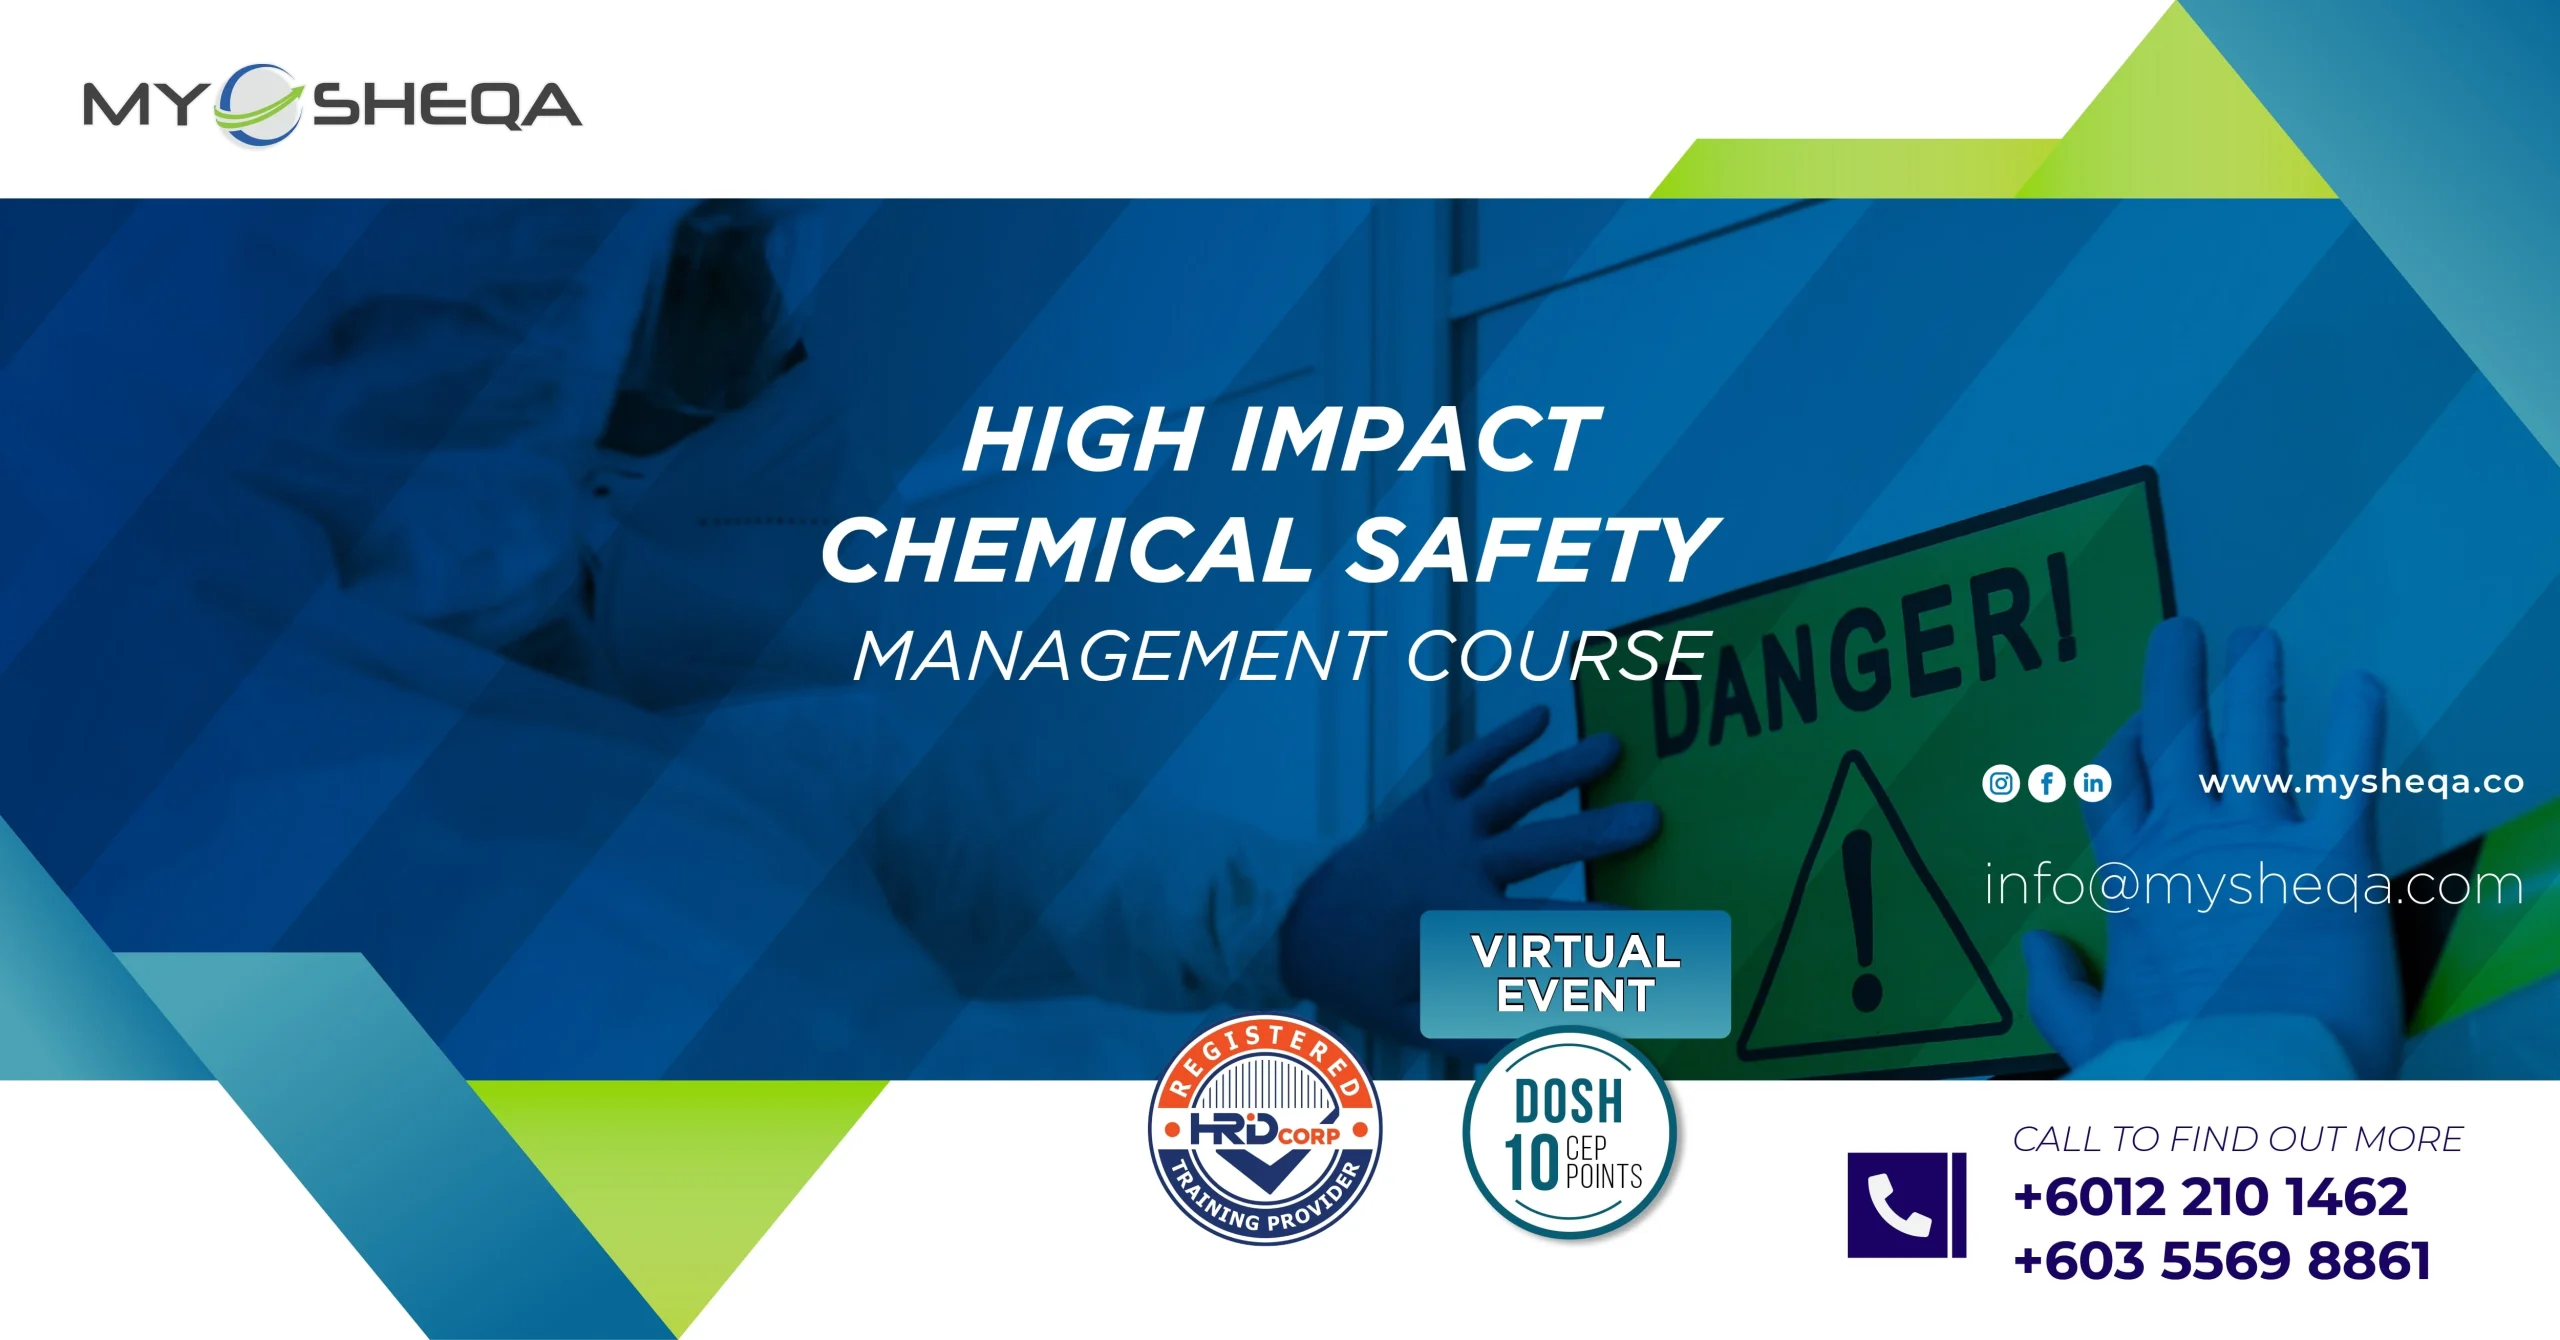 High Impact Chemical Safety Management Course